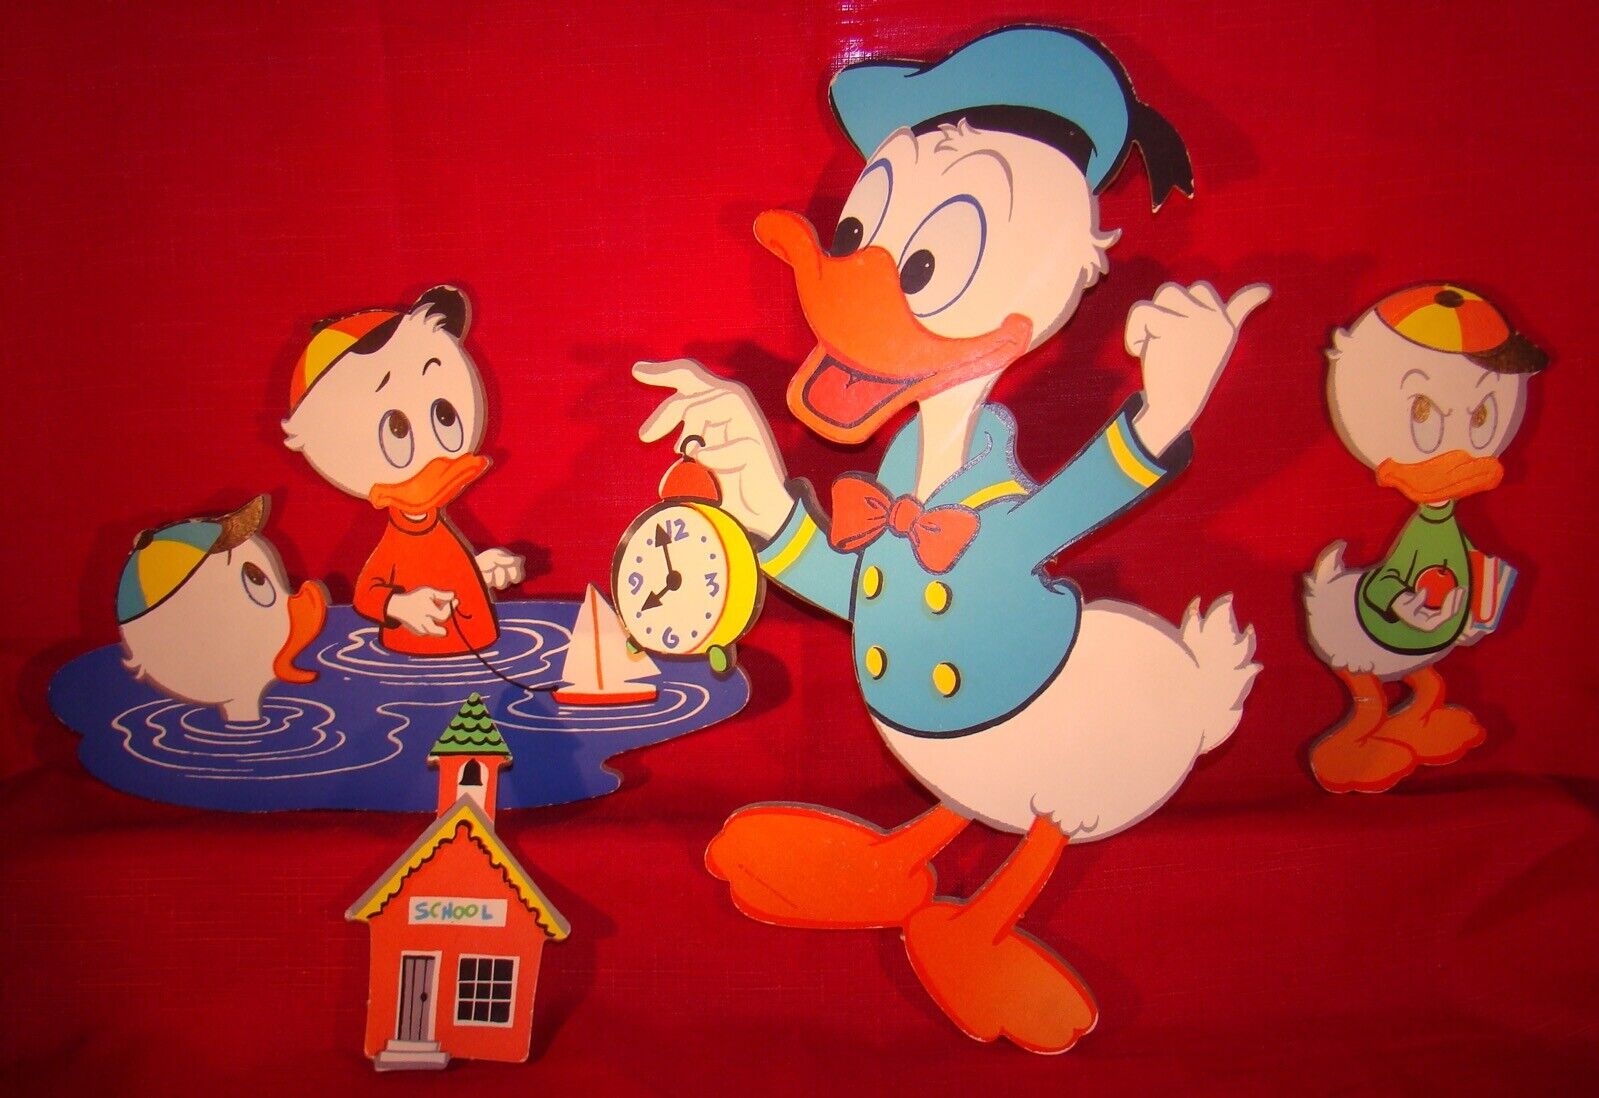 DONALD DUCK & NEPHEWS “SCHOOL DAYS PIN-UPS” 1950’s WALL PLAQUES - 65 YEARS OLD